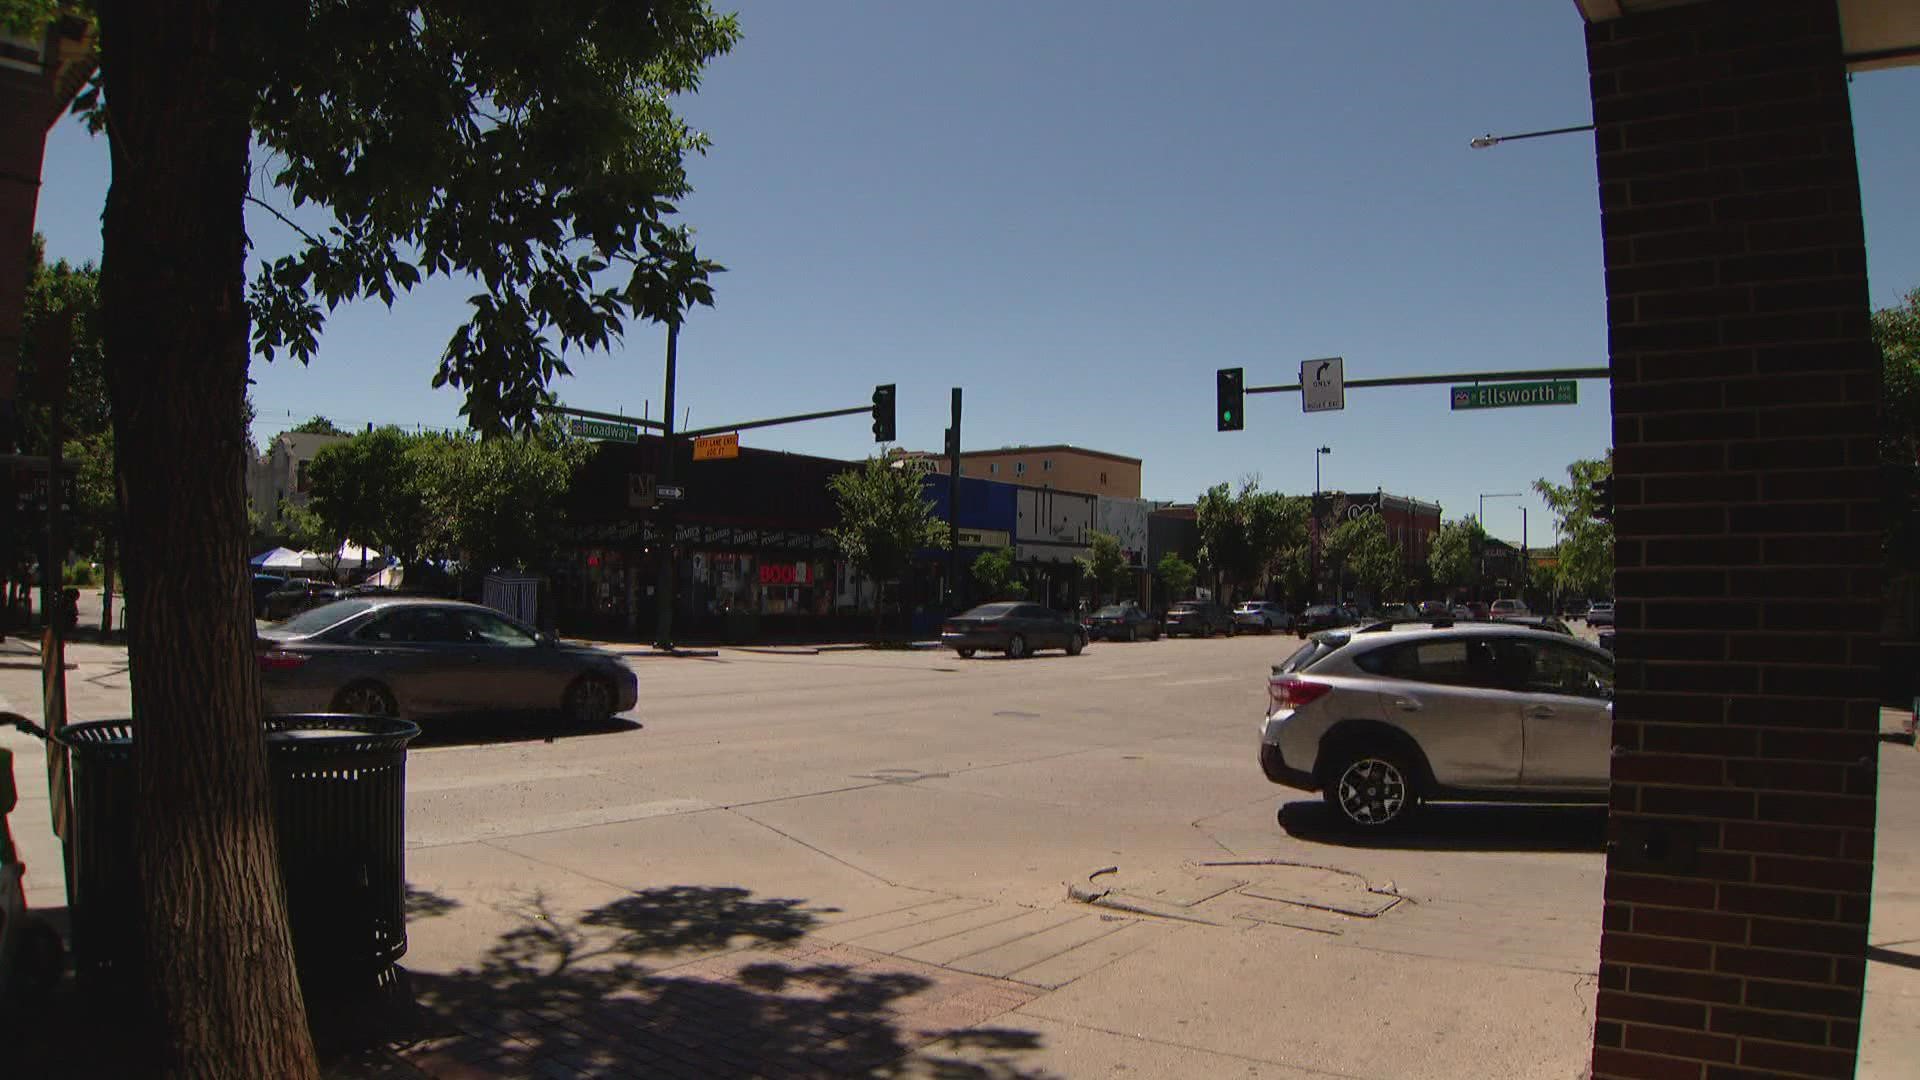 Denver Police said a person was hit in the area of North Broadway Street and West Ellsworth Avenue.